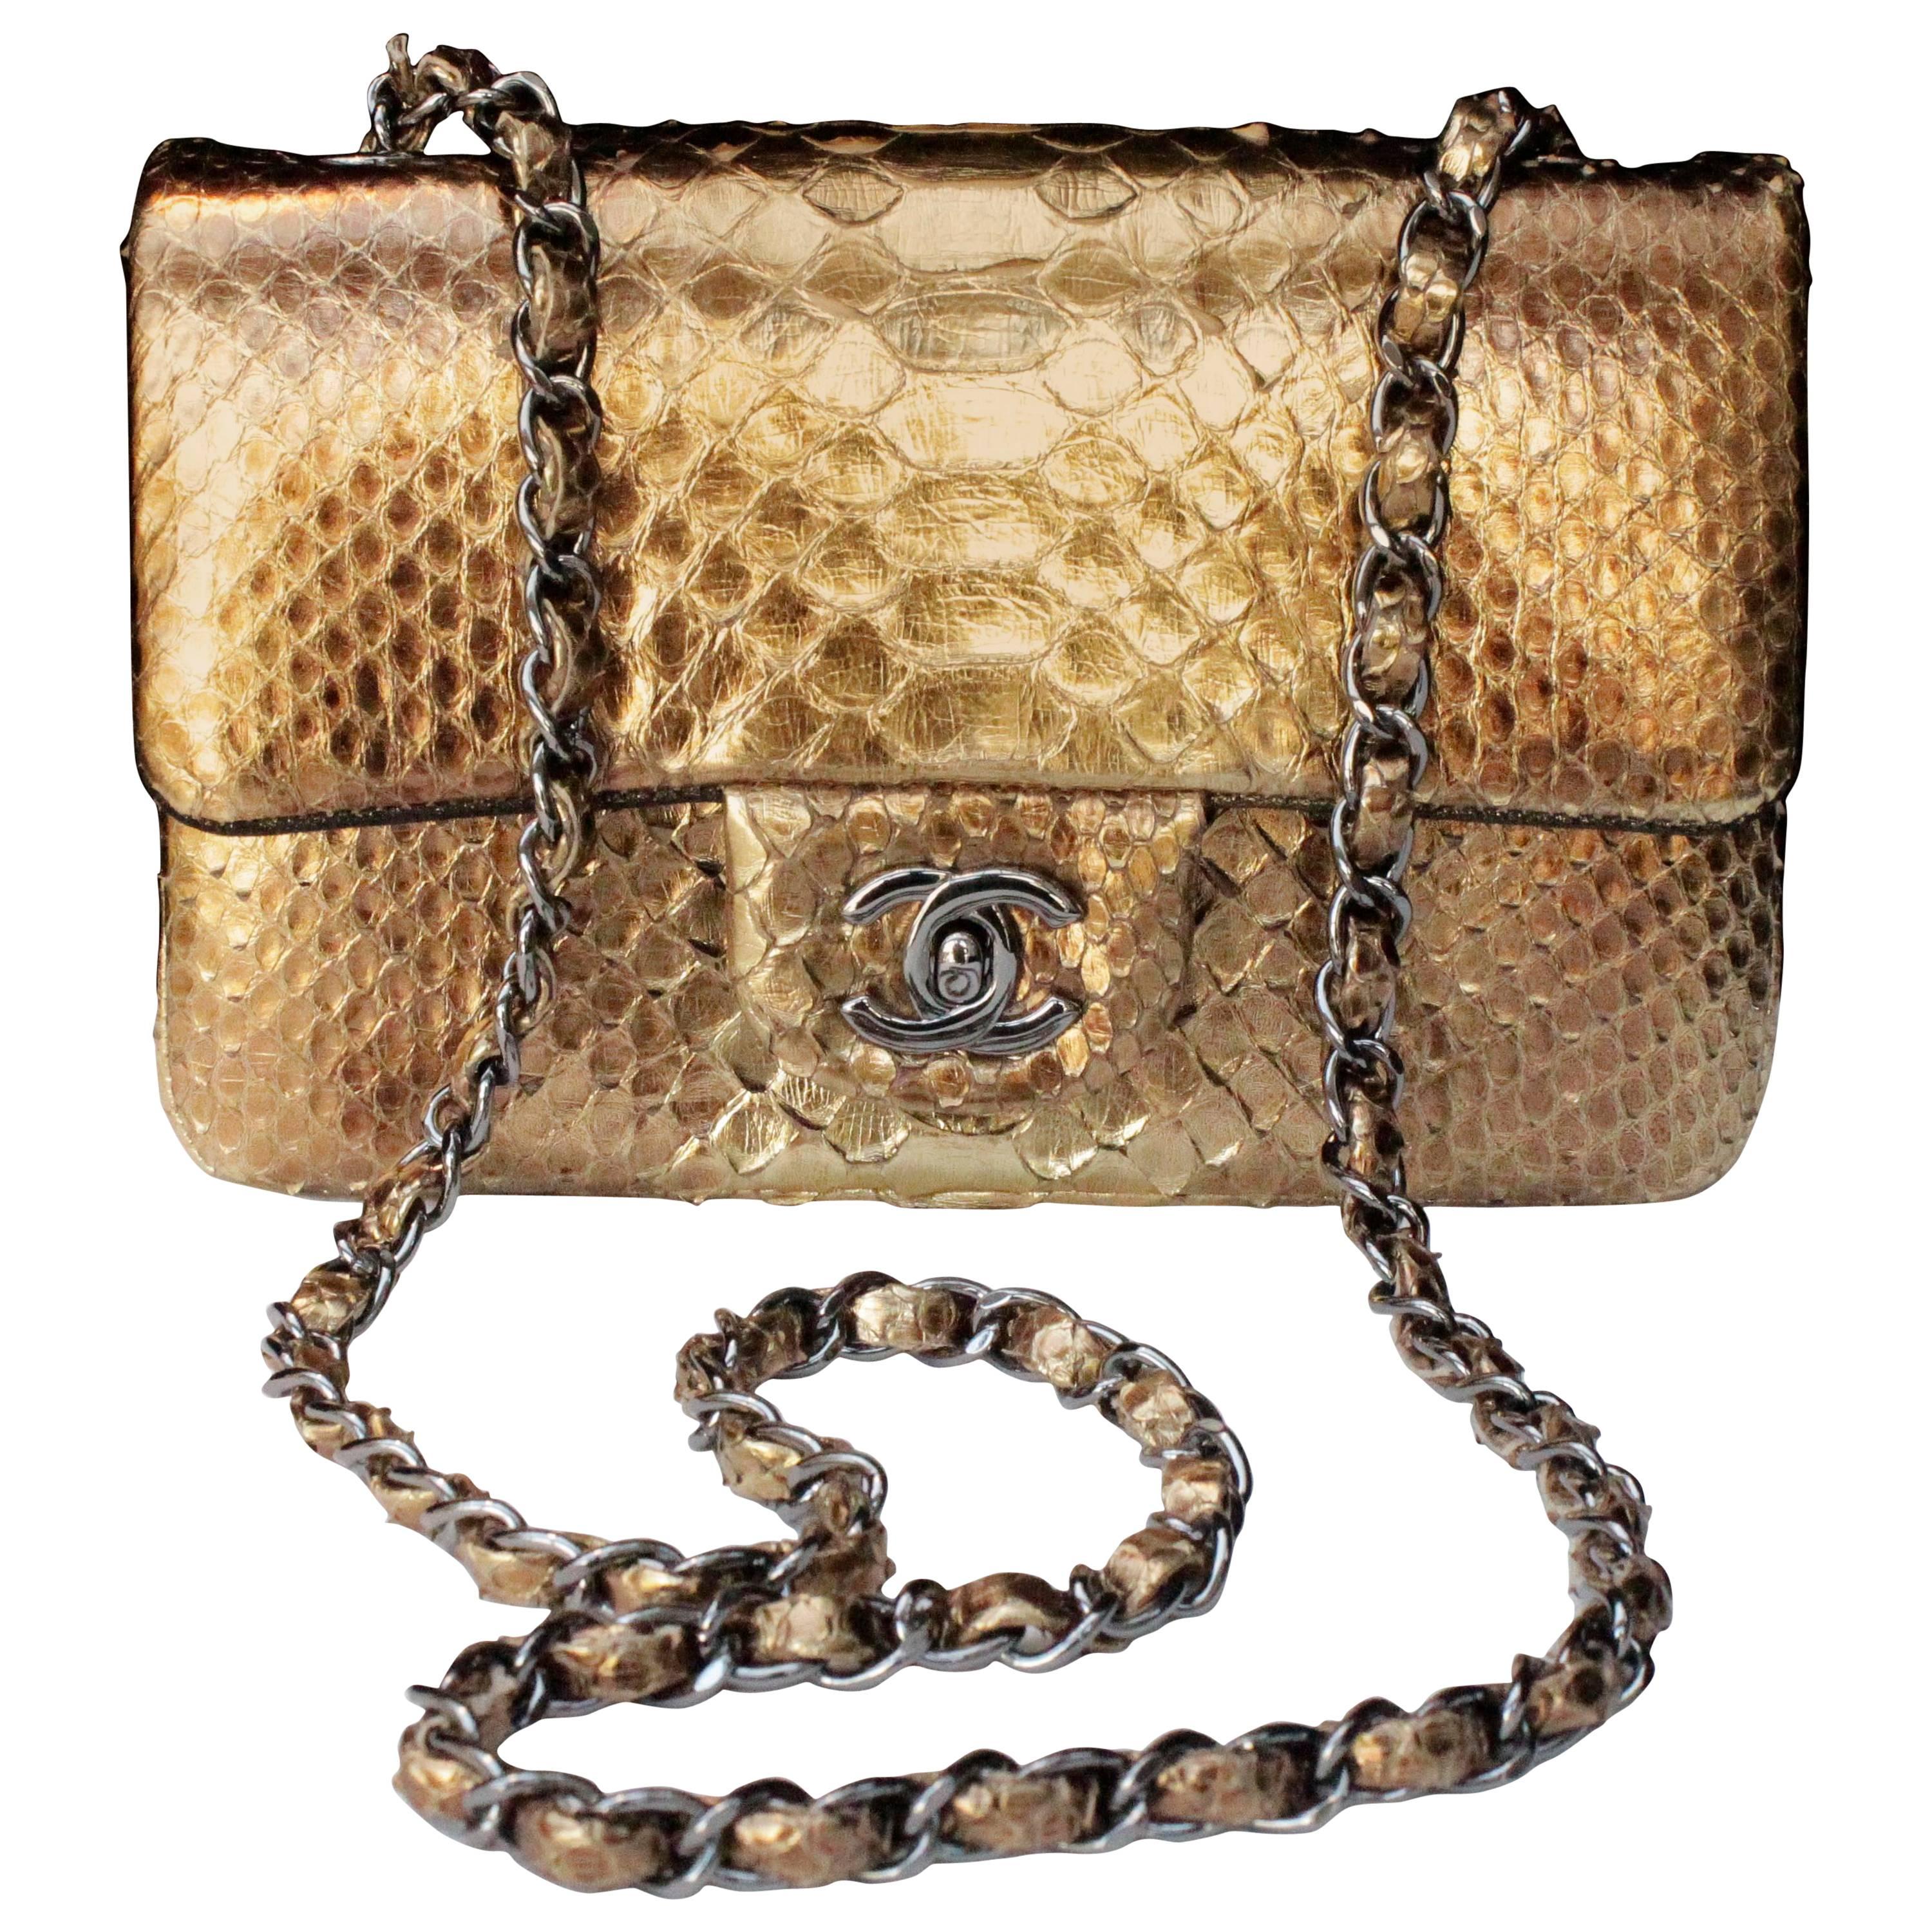 2000s Chanel Mini Timeless bag in Gold Tone Snakeskin and Silvered Hardware